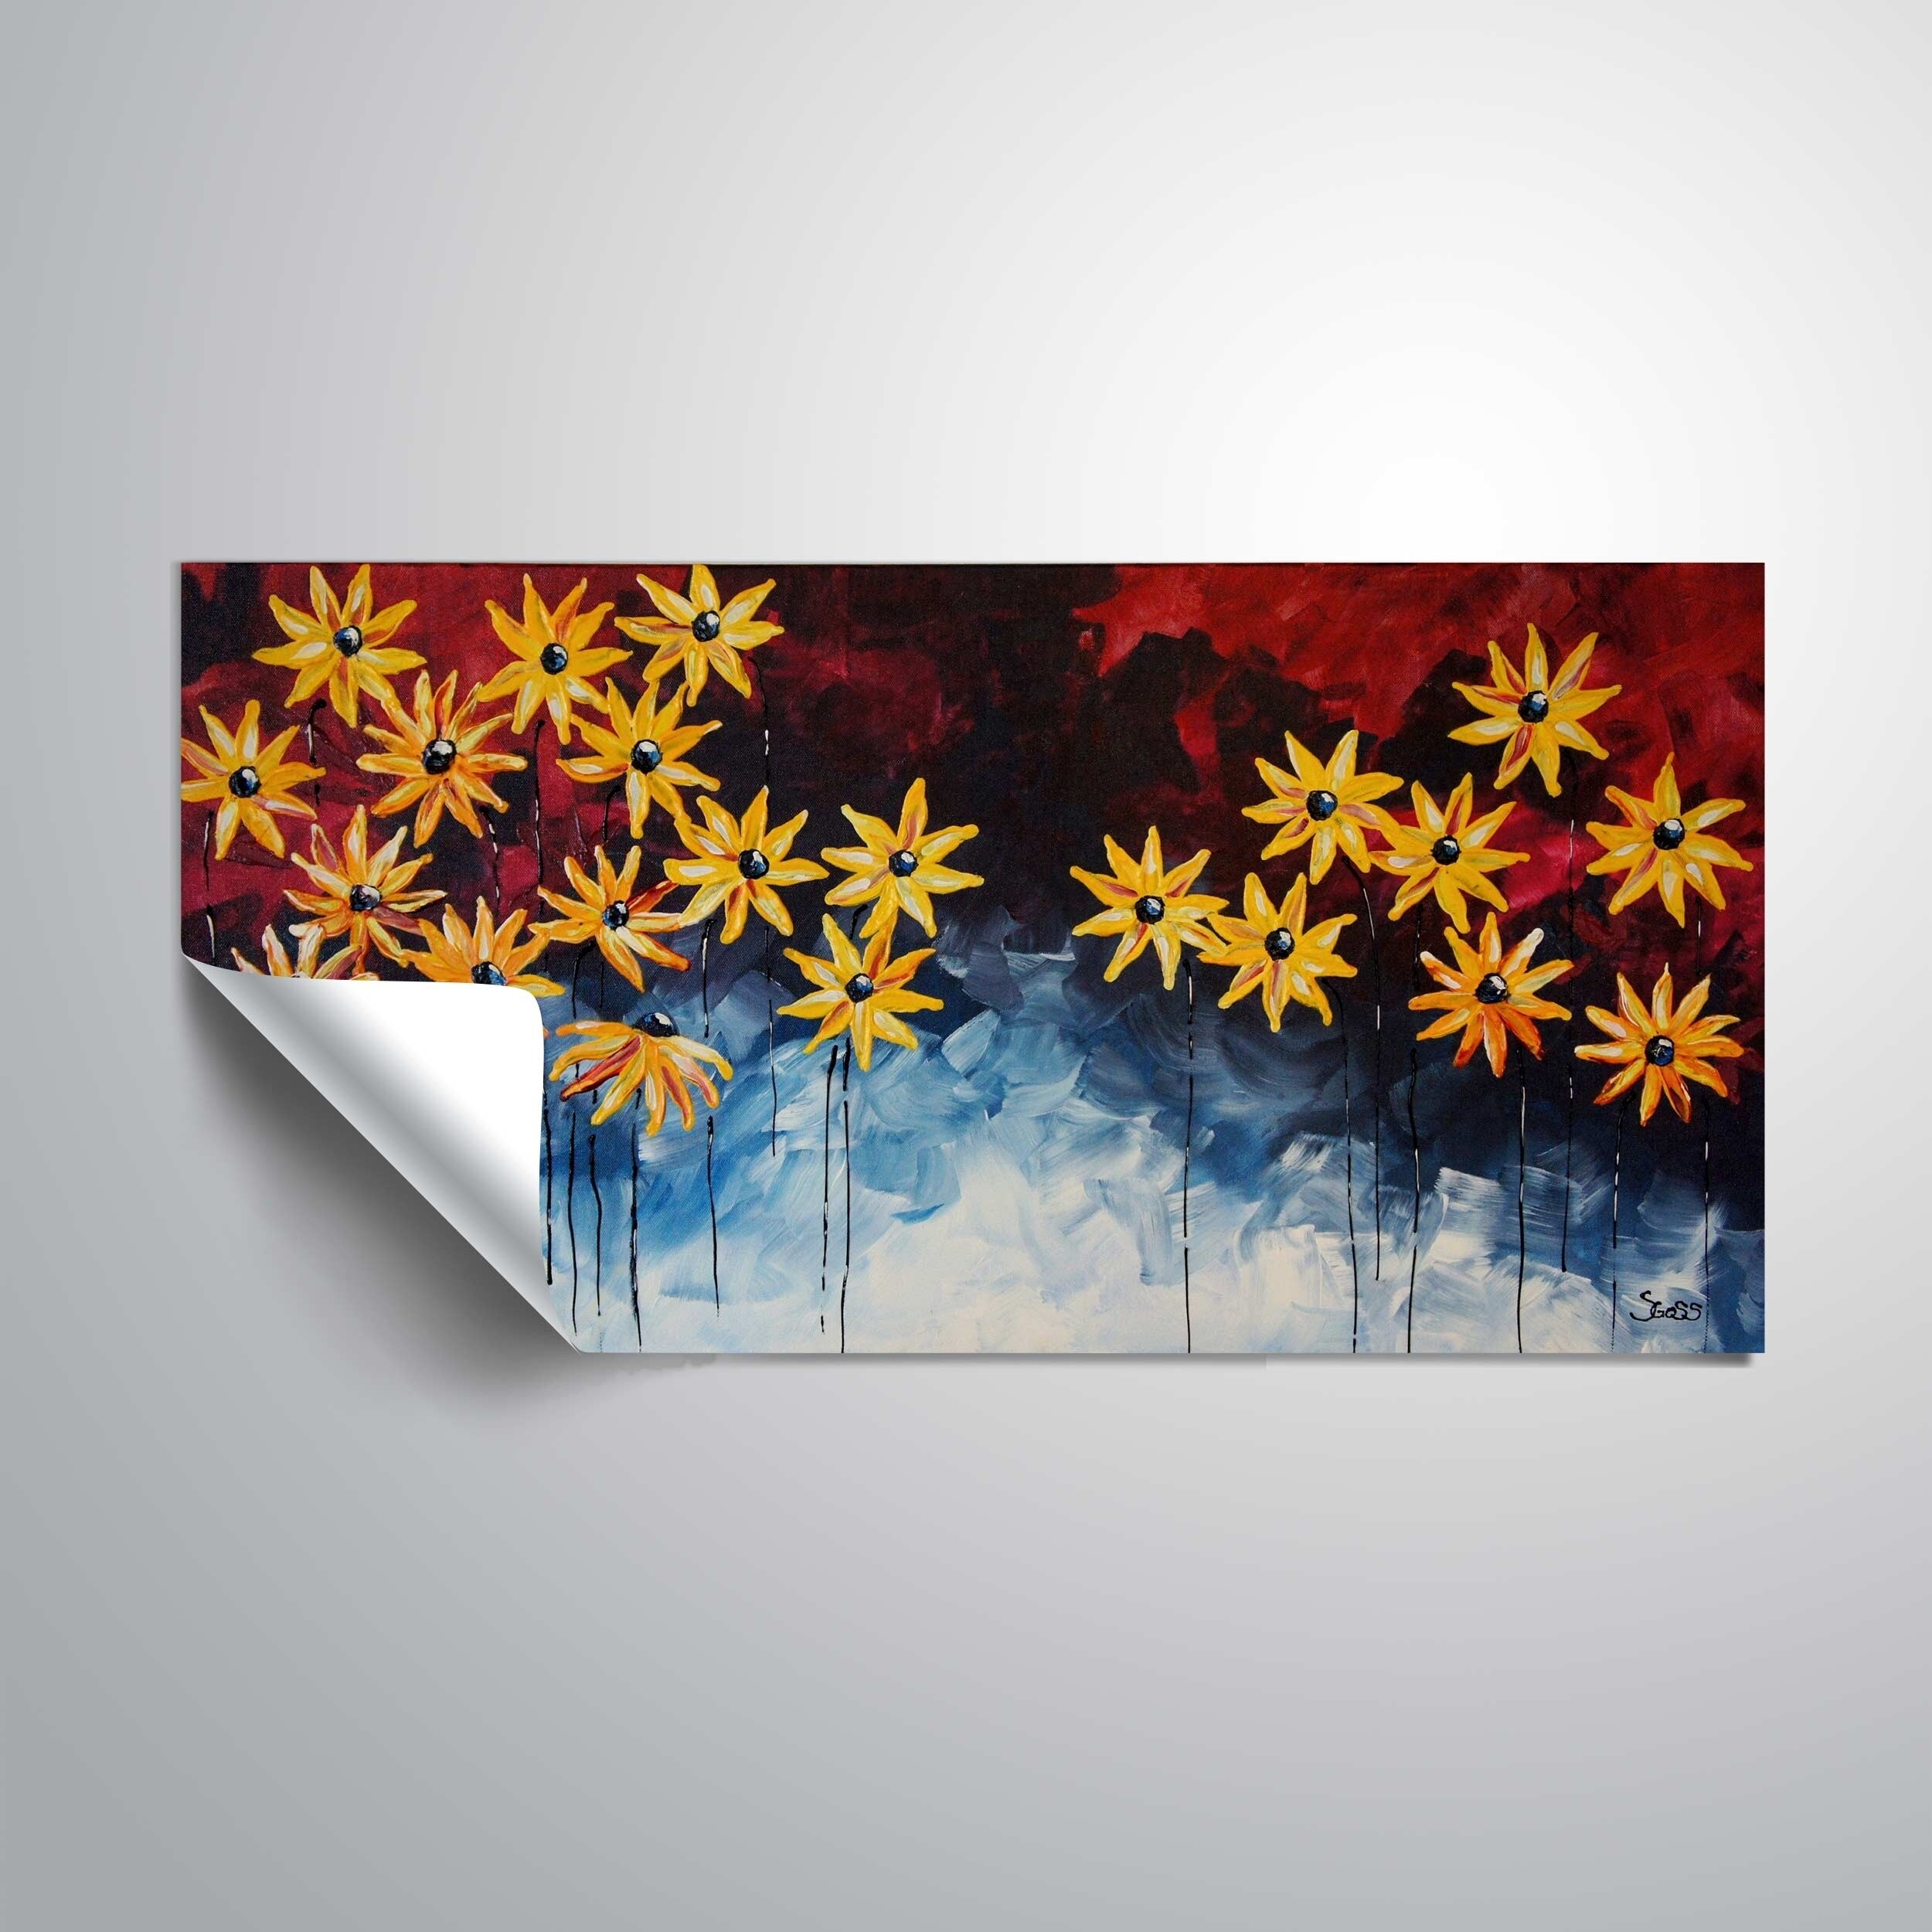 18 x 18 ArtWall 0tro027a1818p Meaghan Troups Black Eyed Susans 2 Removable Wall Art Mural 